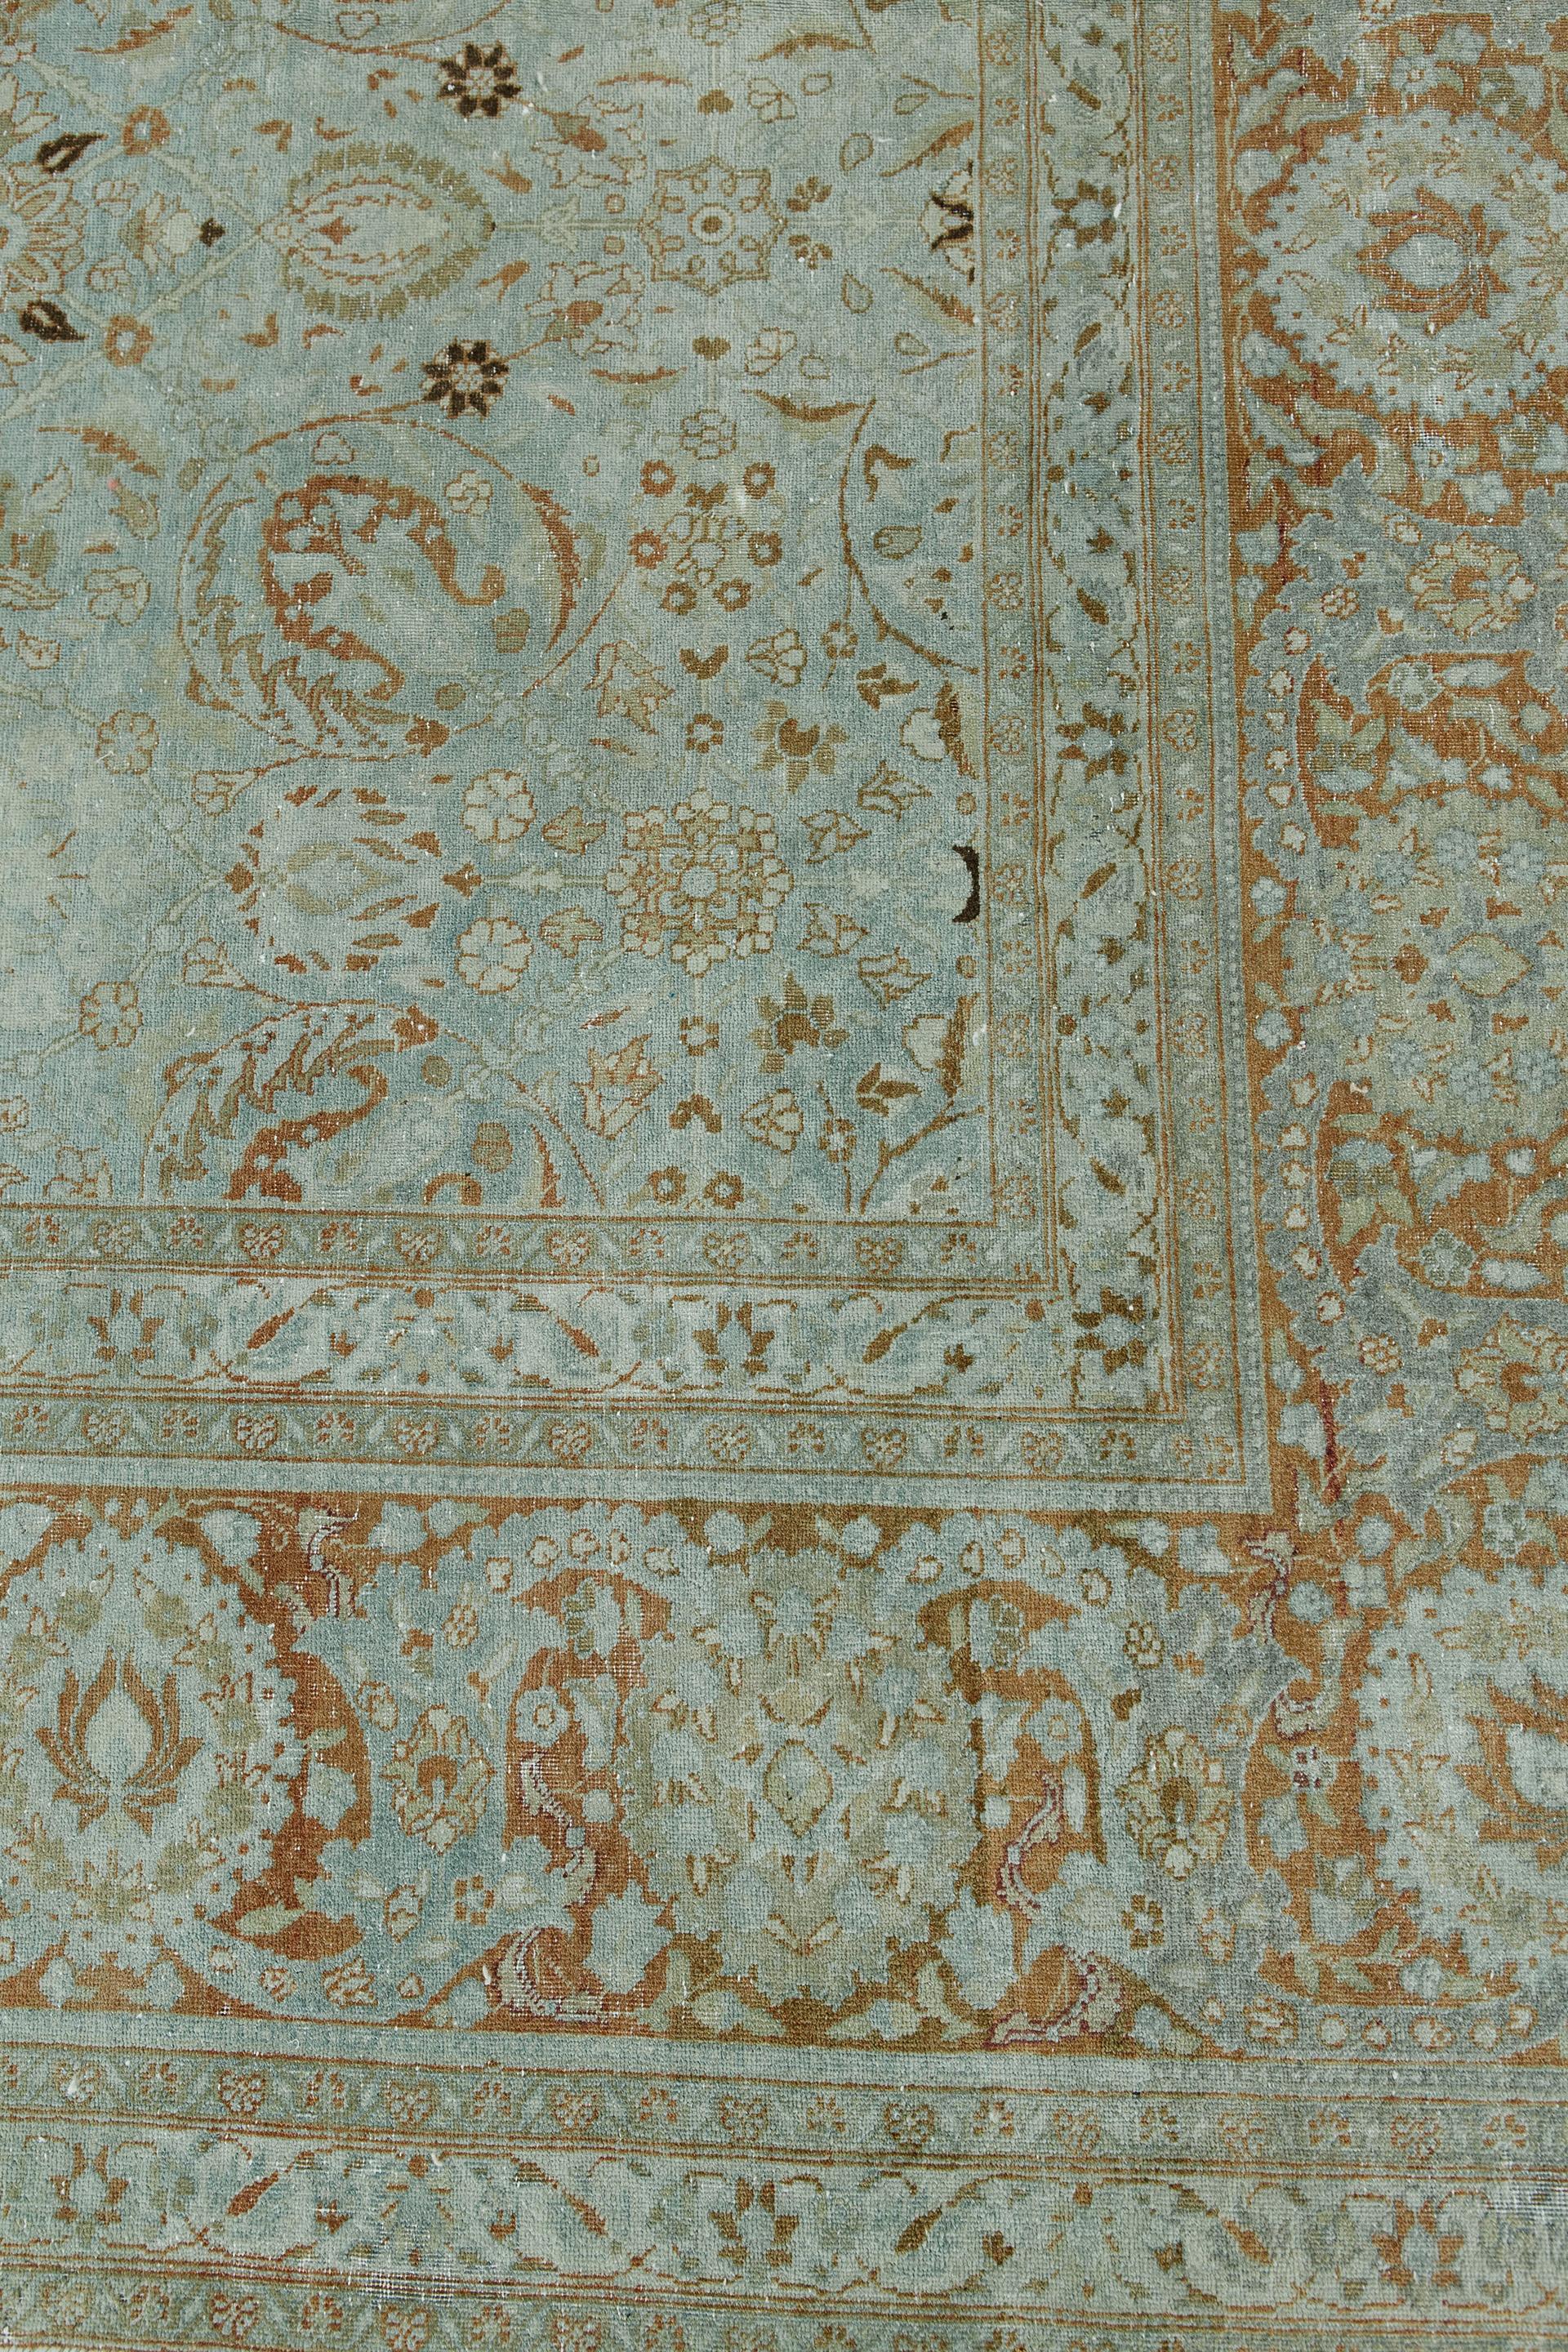 Woven of Classic medallion all over pattern built on a soft pastel blue tone with accents of rust orange. Over 100 years old this hand knotted piece comes from the center of carpet production, Tabriz in Northwest Iran/Persia.

Rug number: